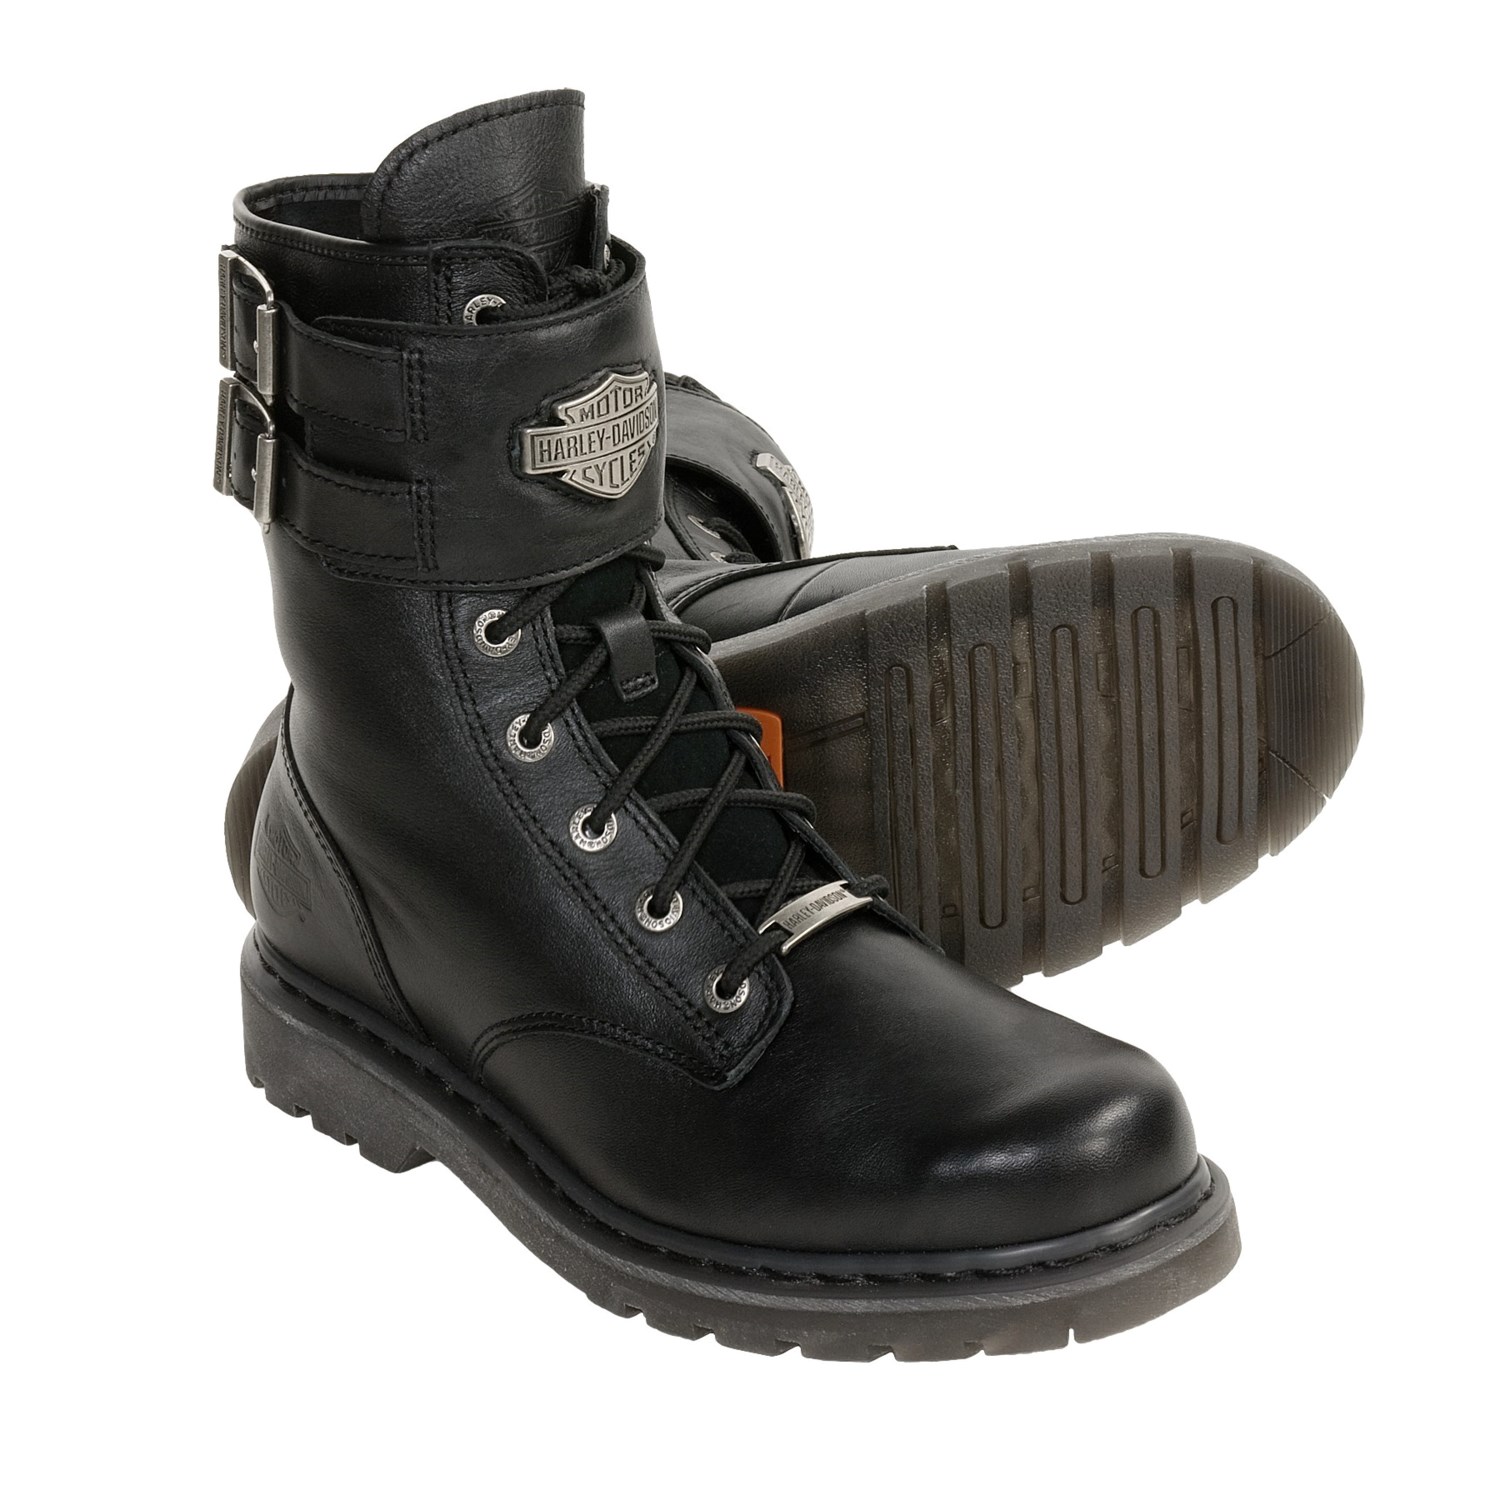 Harley-Davidson Archie Motorcycle Boots (For Men) 3314P - Save 38%